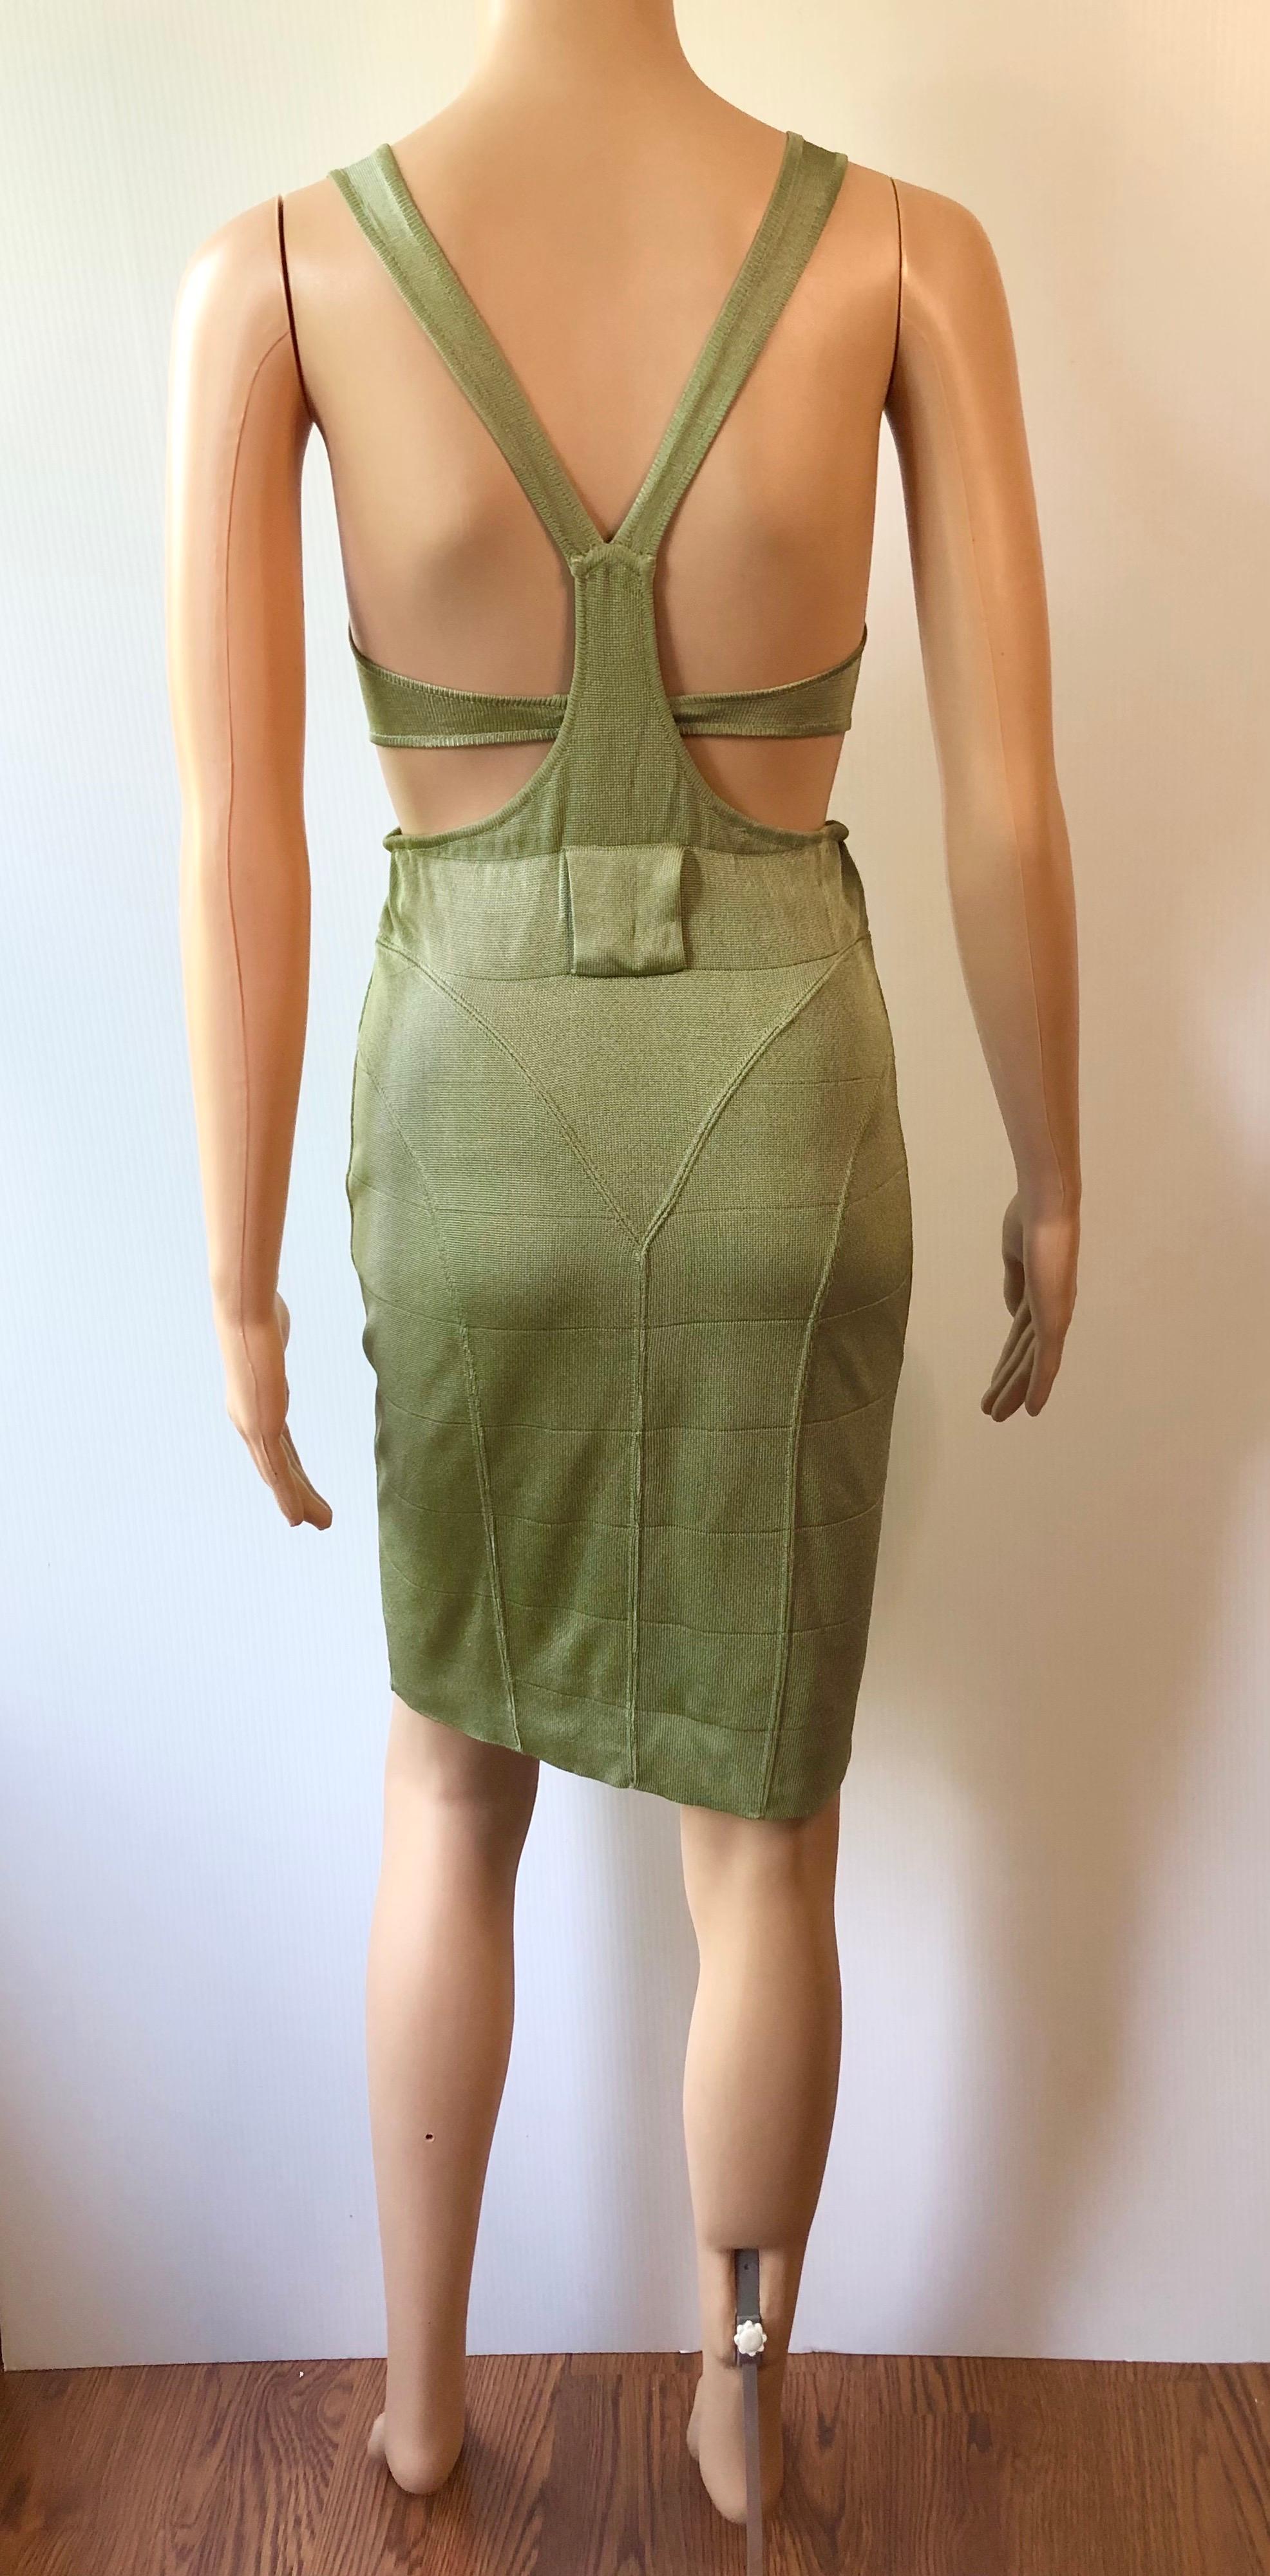 Azzedine Alaia S/S 1985 Vintage Plunged Cutout Bodycon Green Dress For Sale 1